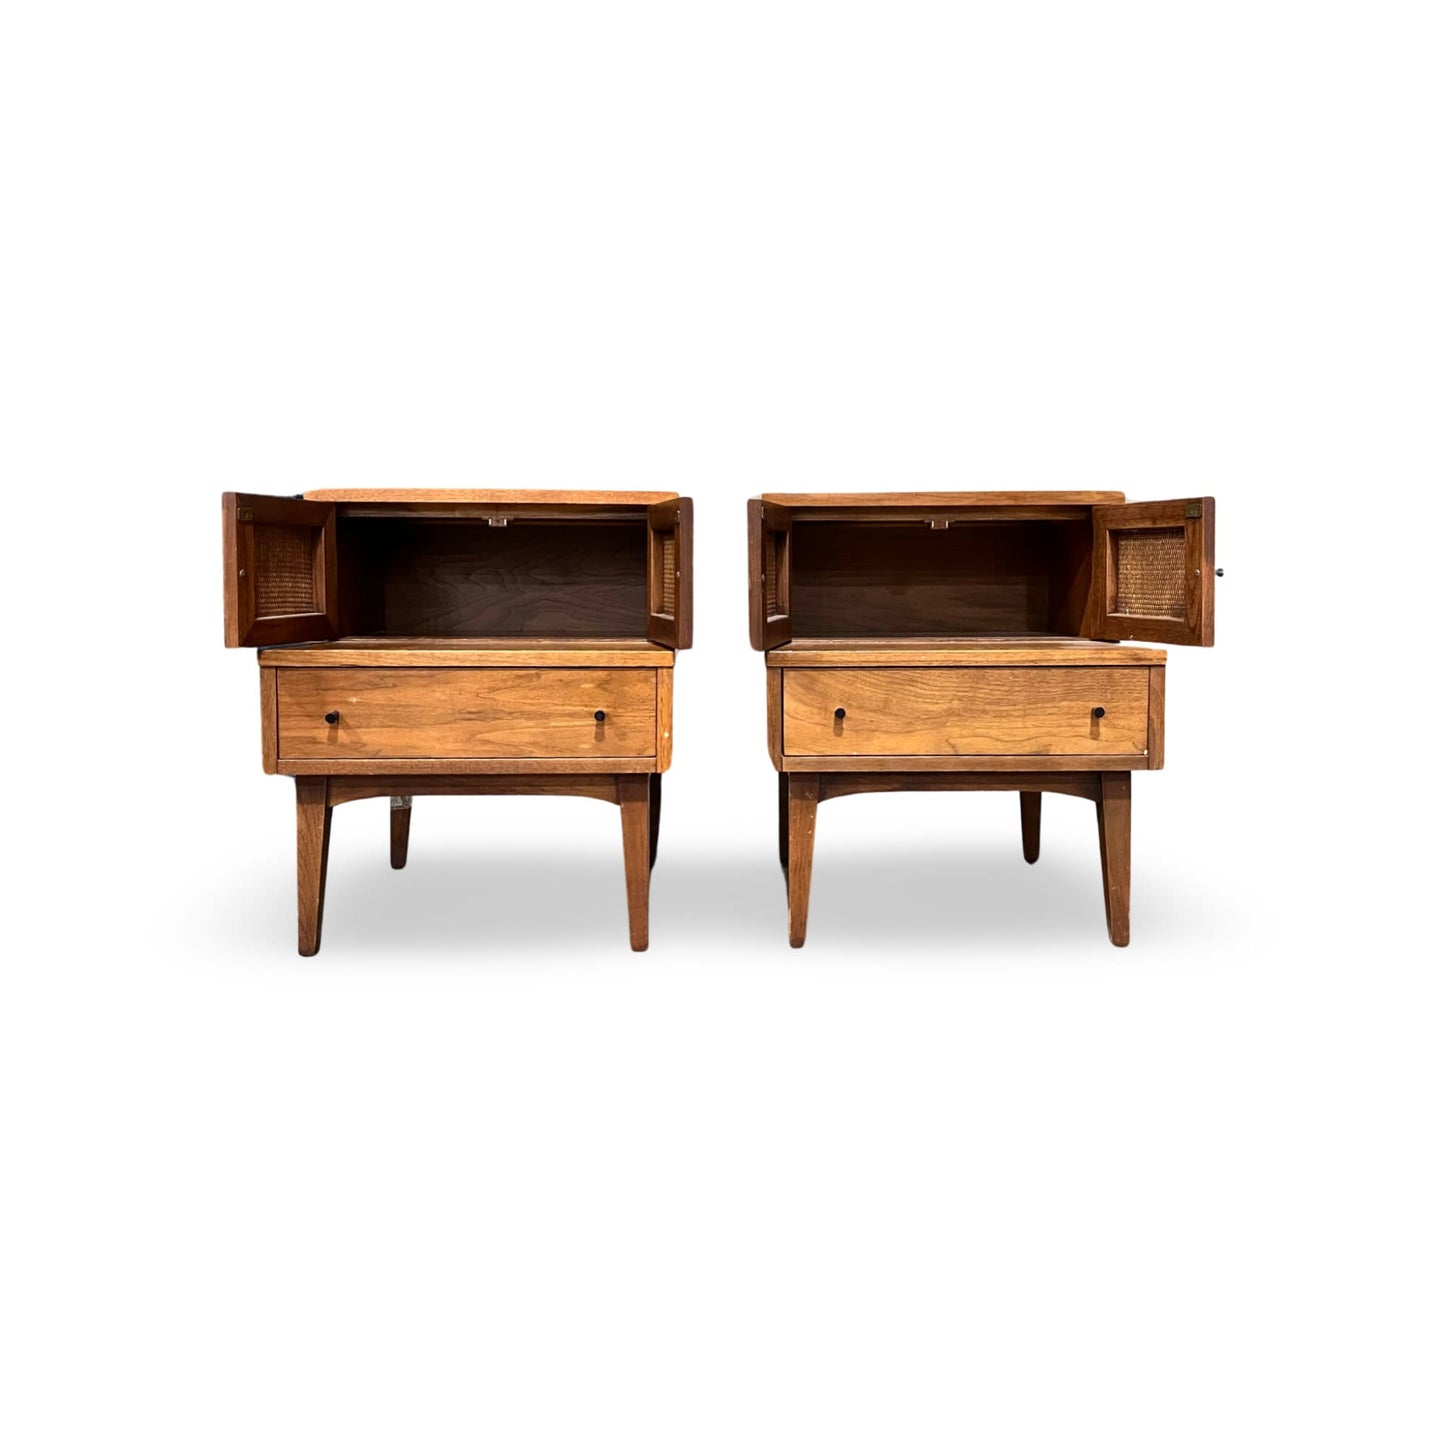 Timeless design nightstands, perfect for adding mid-century charm to bedrooms.